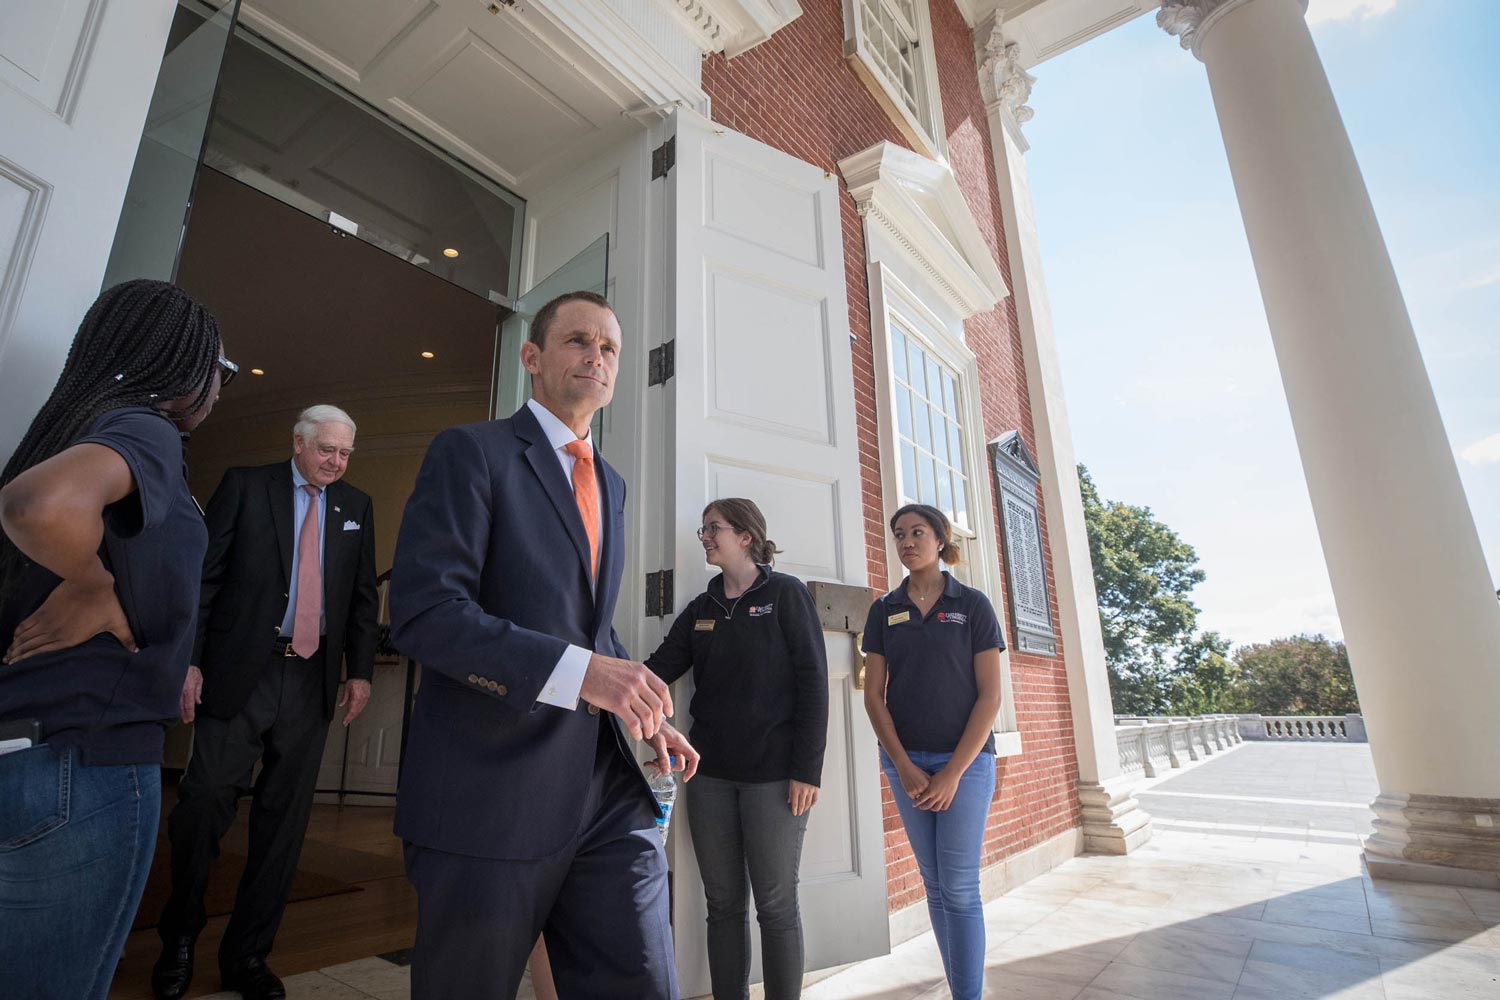 James Ryan emerges from the Rotunda after his unanimous election by UVA’s Board of Visitors. (Photo by Sanjay Suchak, University Communications)